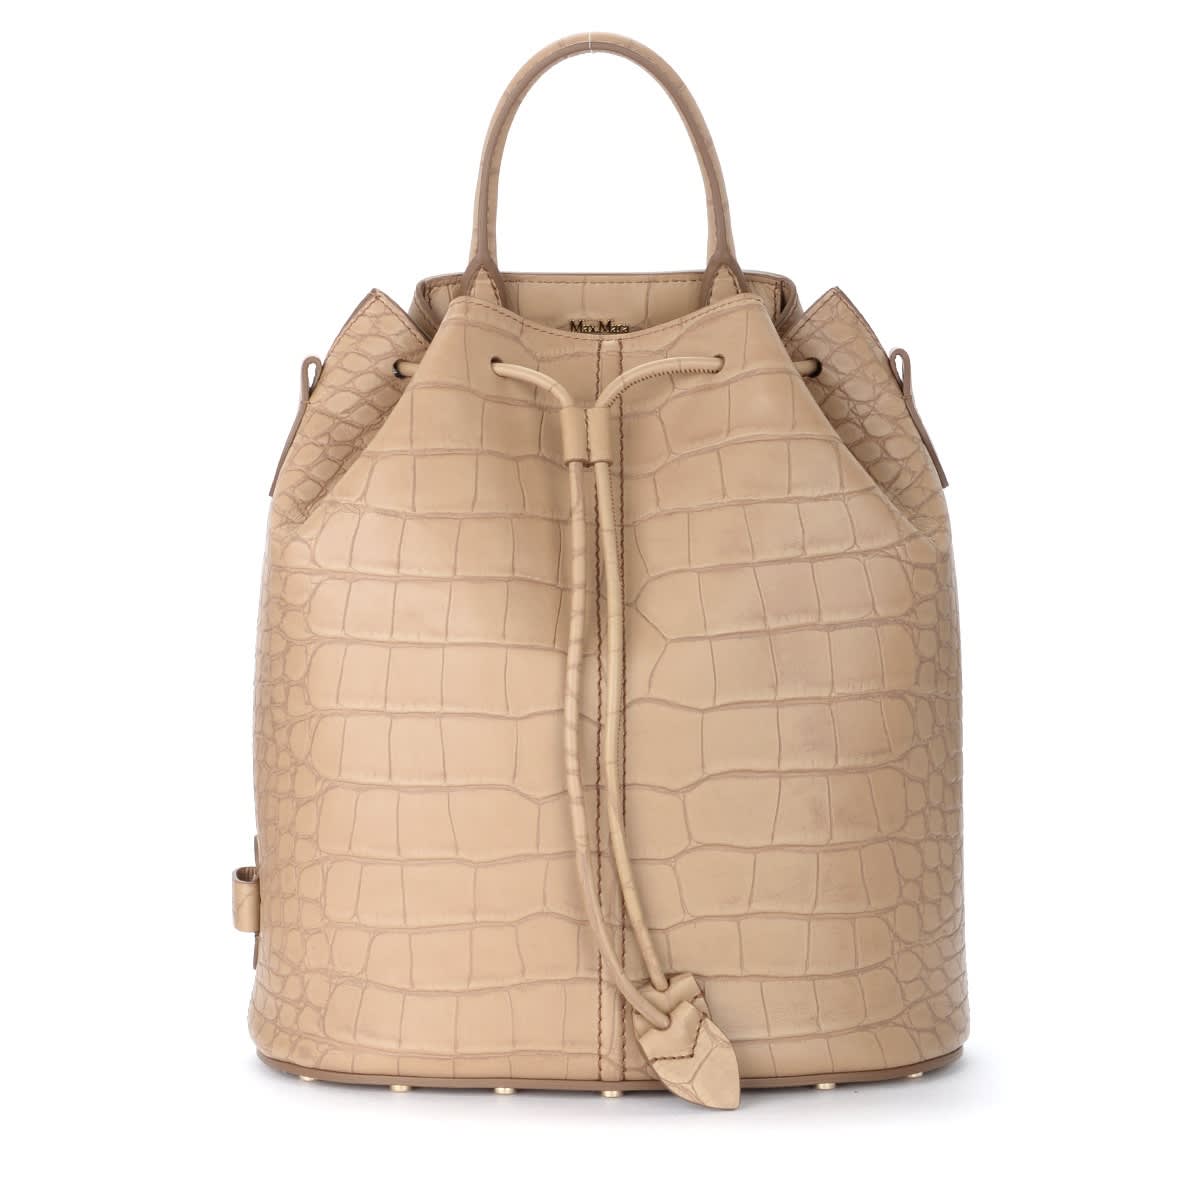 Max Mara Bucket Bag In Camel Color Leather With Crocodile Effect